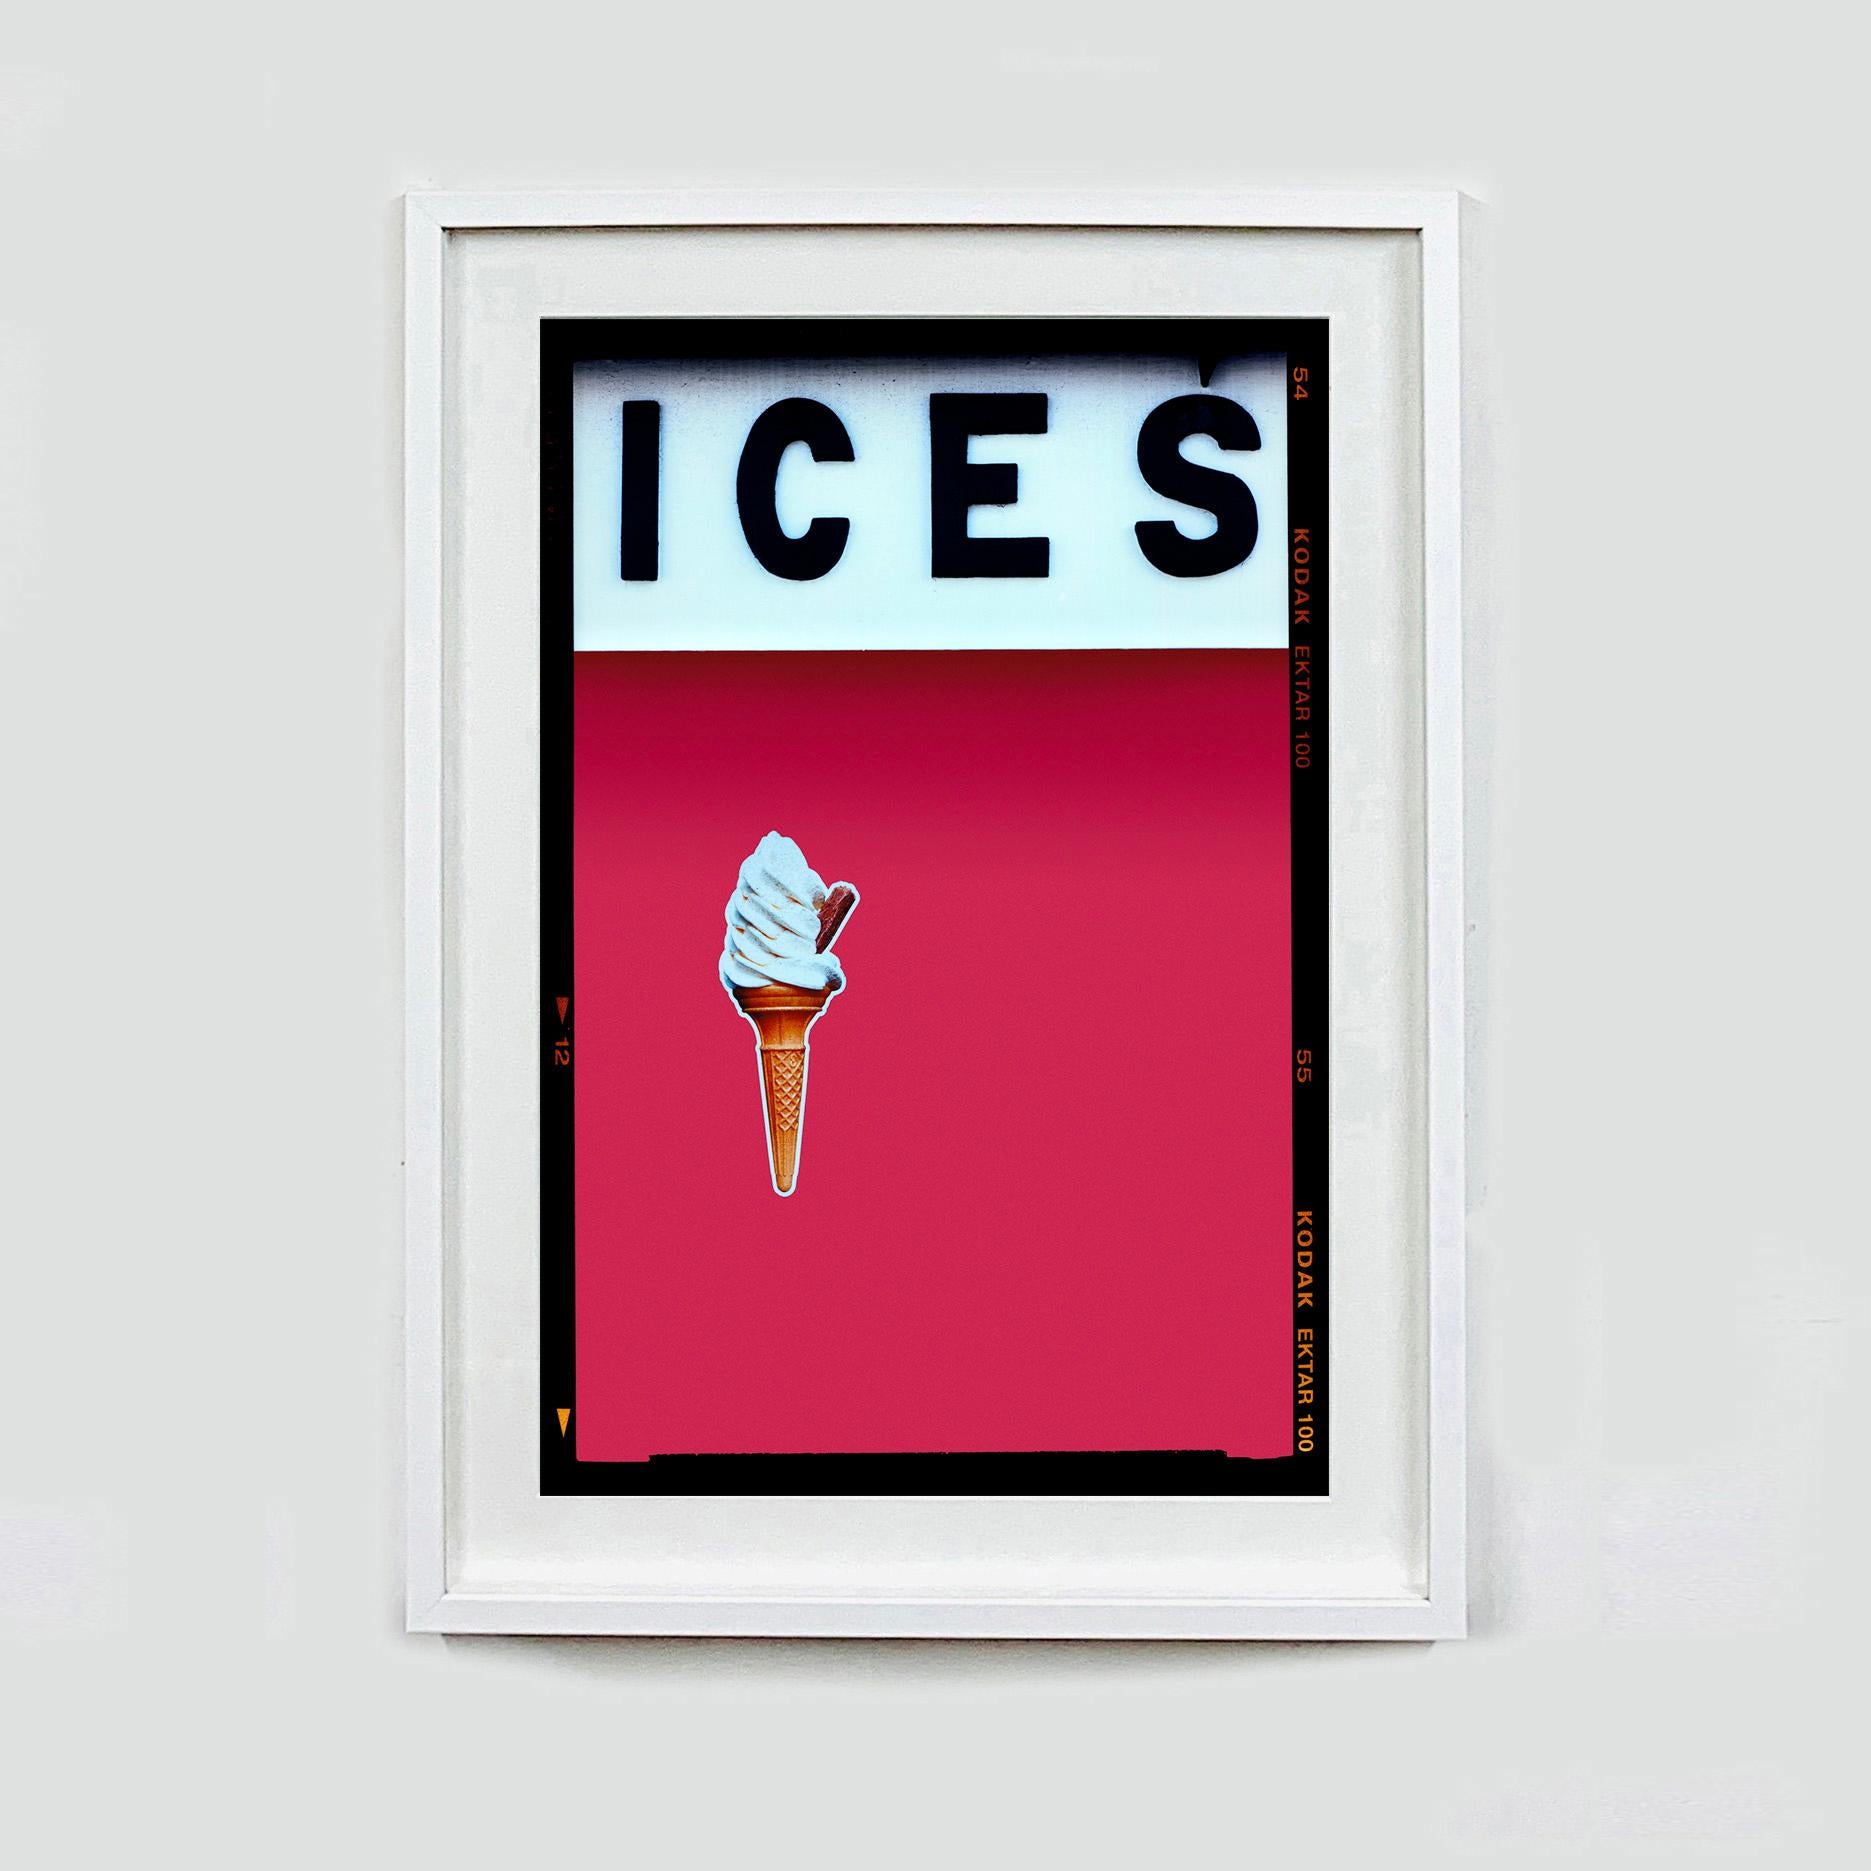 Ices (Raspberry), Bexhill-on-Sea - British seaside color photography - Contemporary Print by Richard Heeps